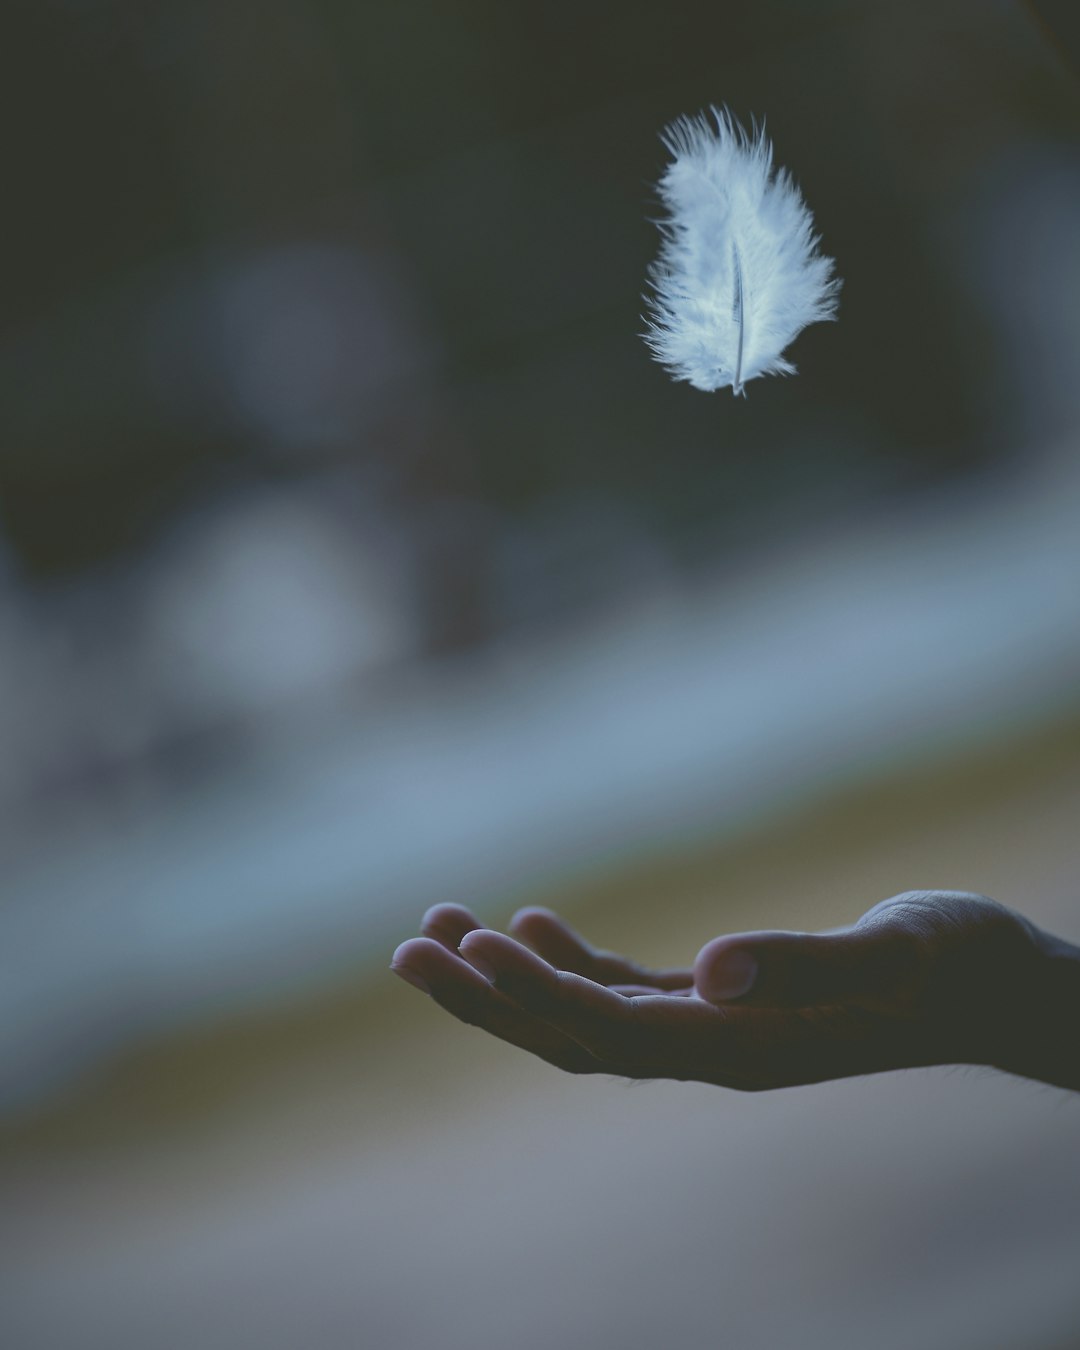  shallow focus photography of white feather dropping in person's hand dove